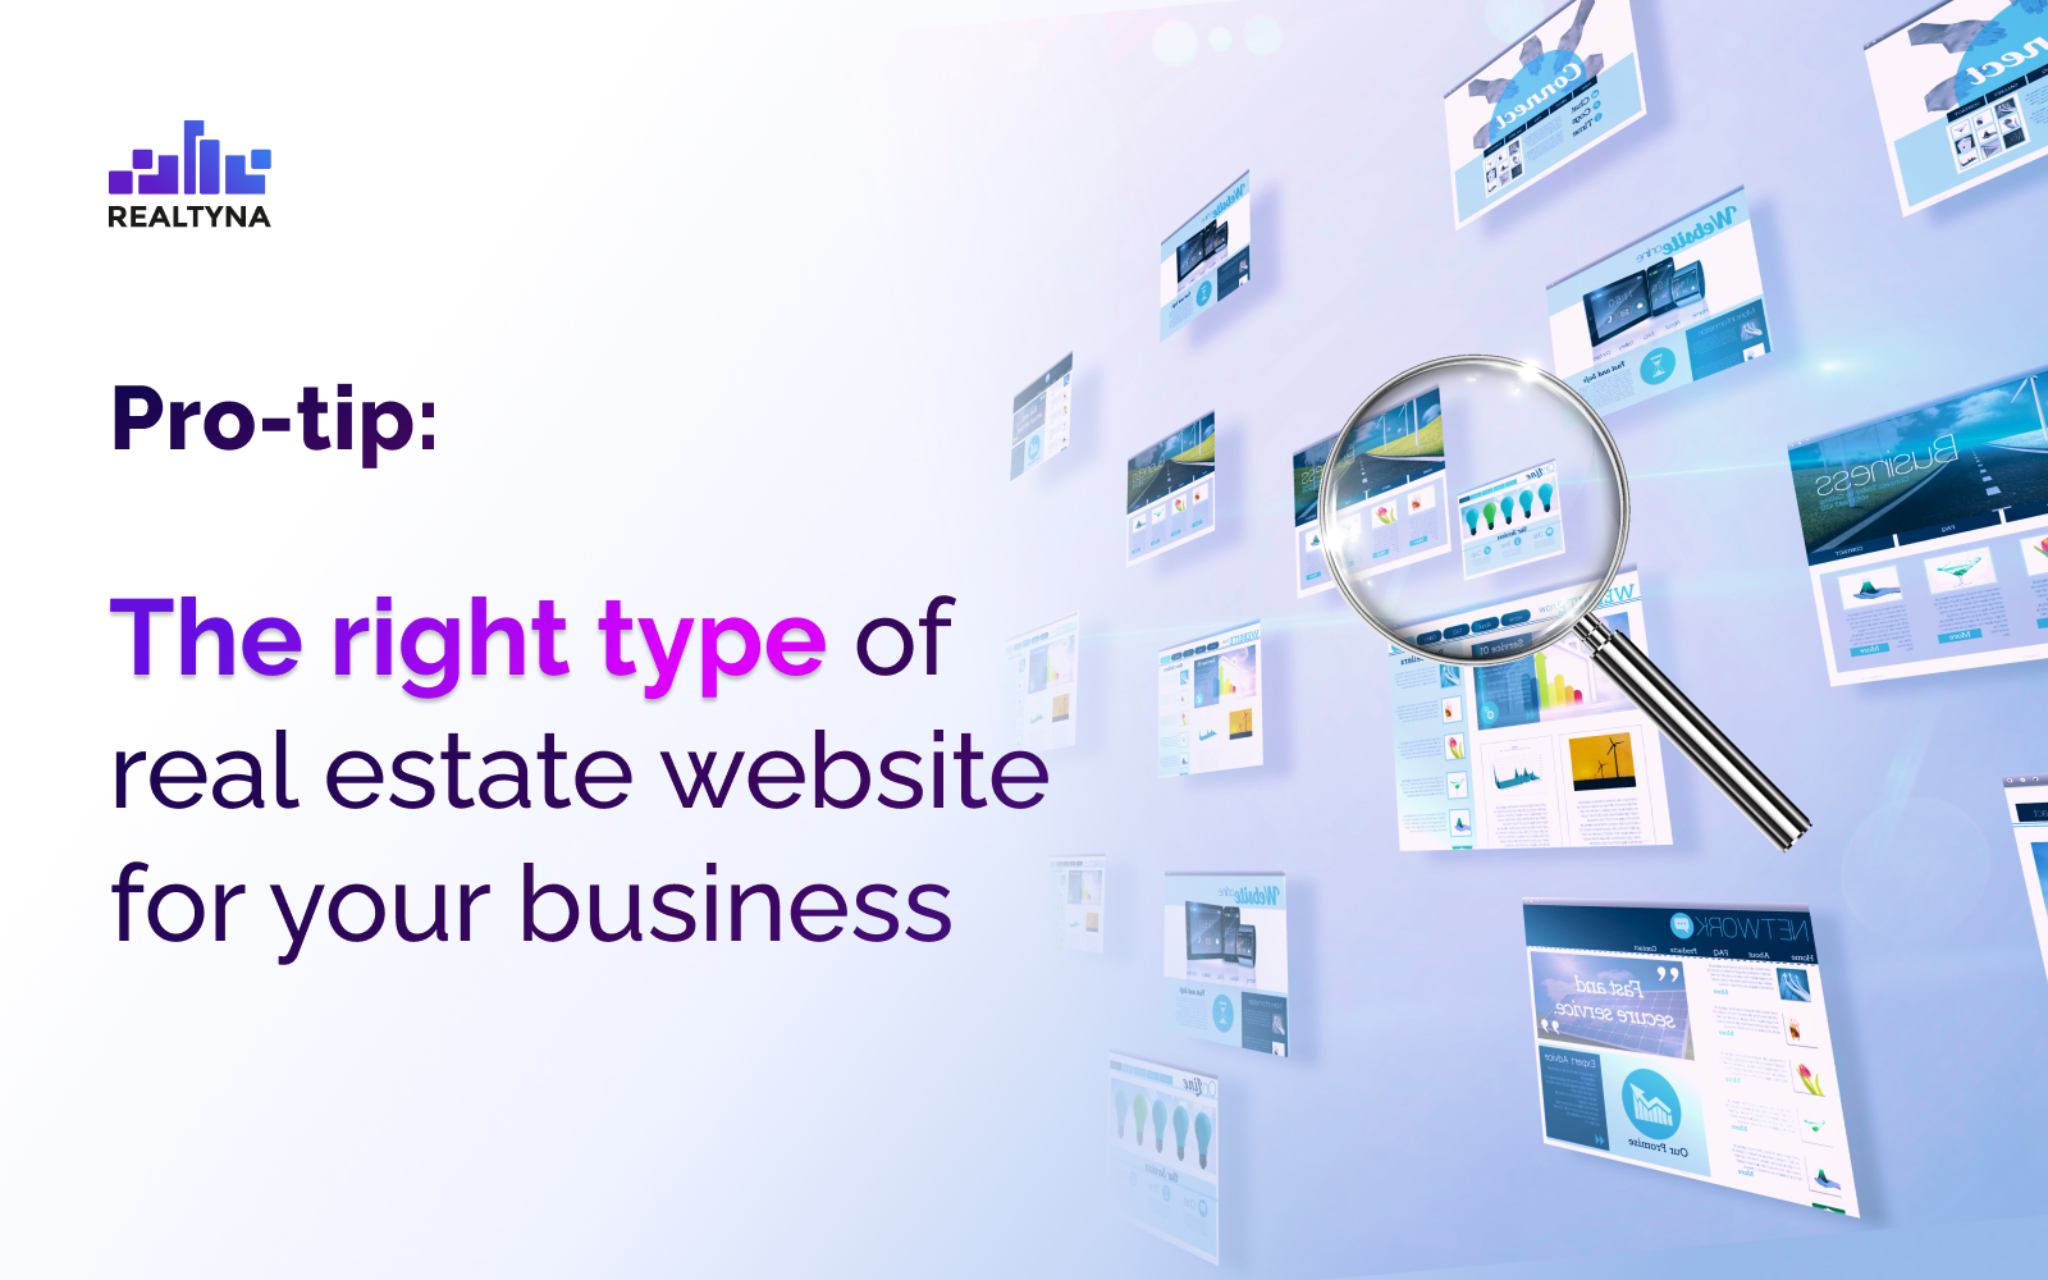 How to choose the right type of real estate website for your business